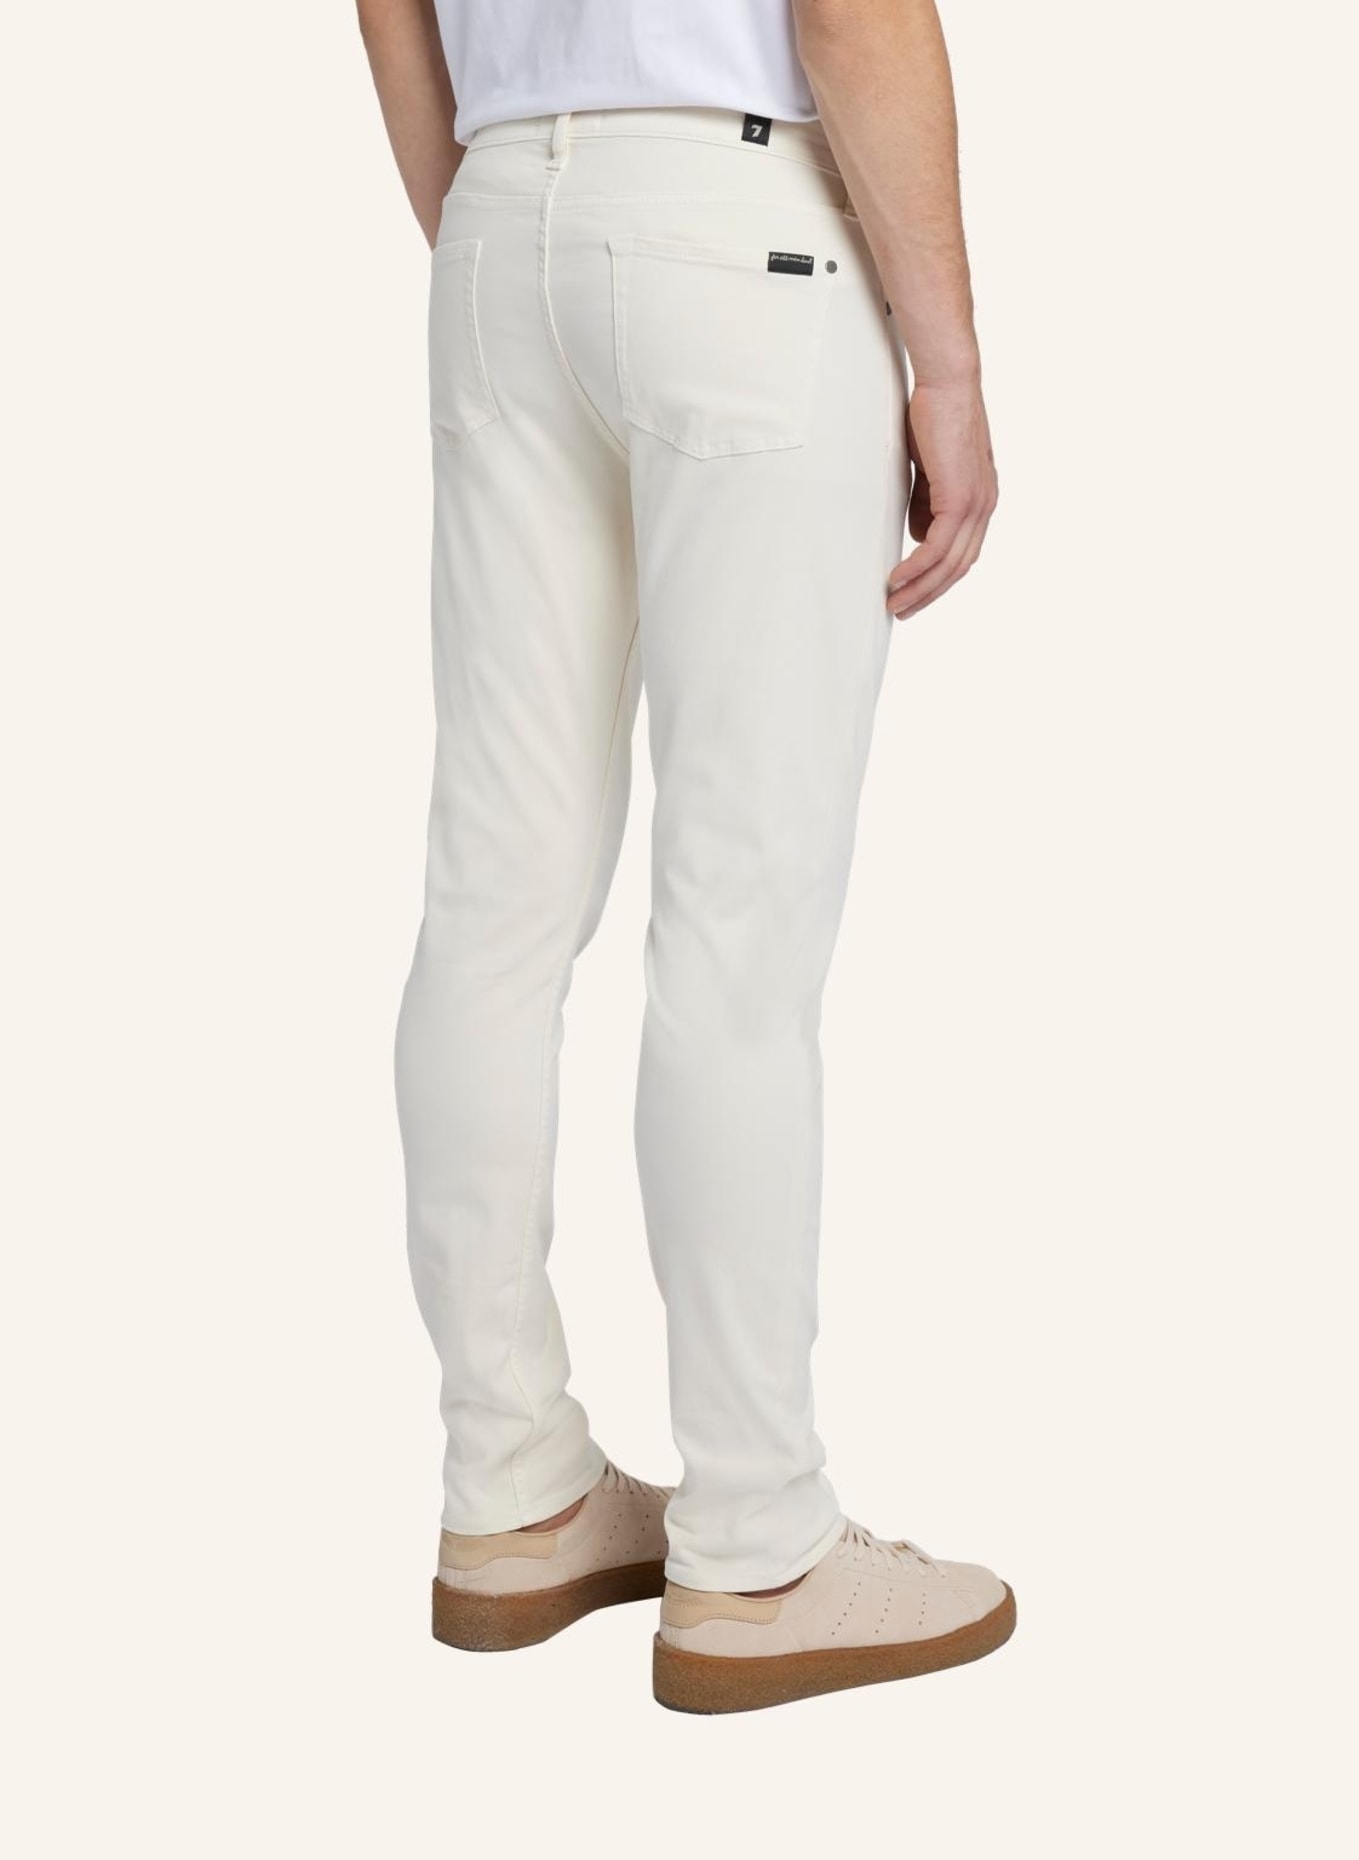 7 for all mankind Pants SLIMMY Slim fit, Farbe: WEISS (Bild 2)